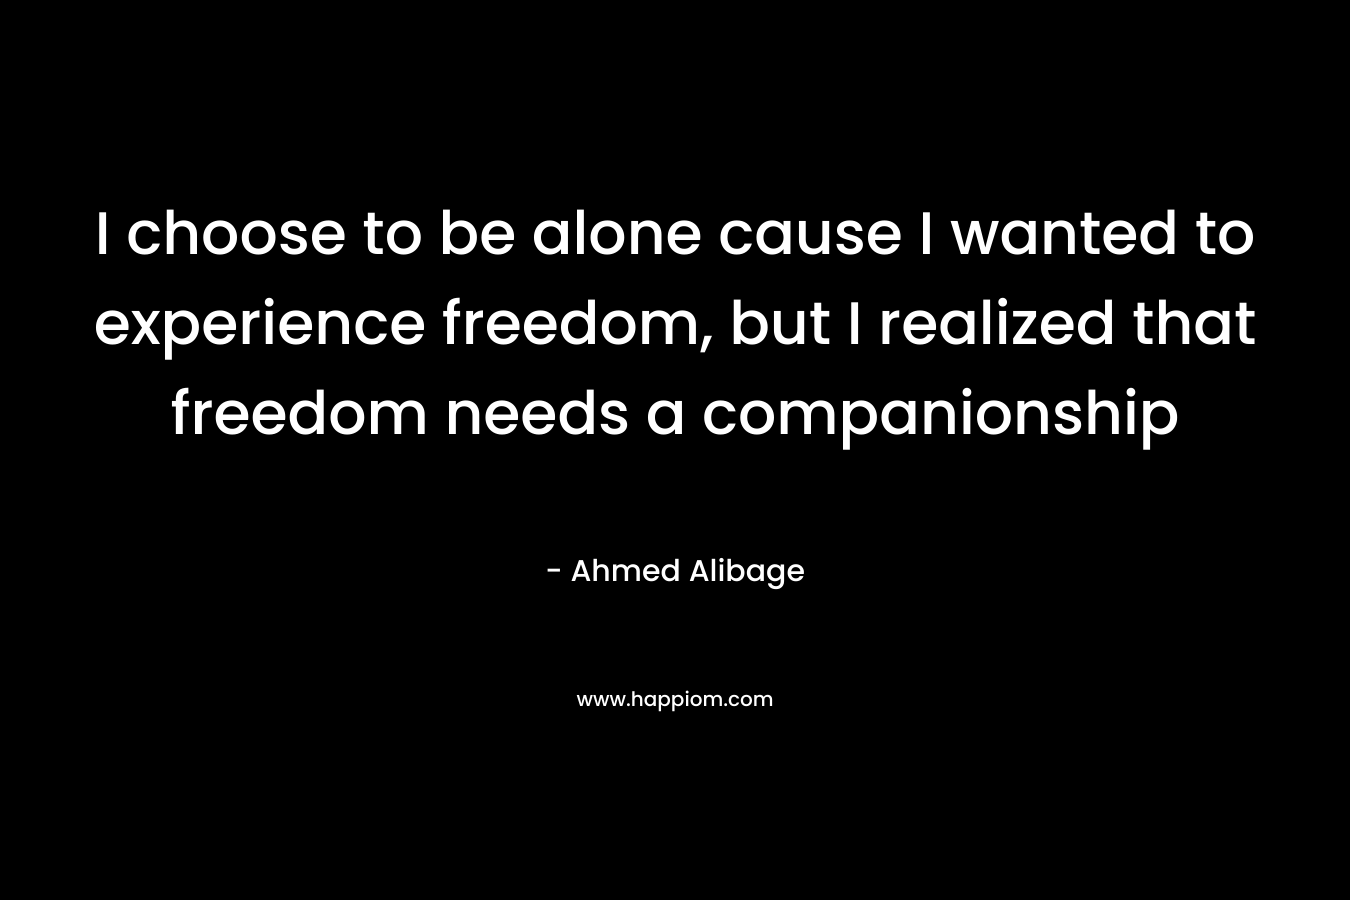 I choose to be alone cause I wanted to experience freedom, but I realized that freedom needs a companionship